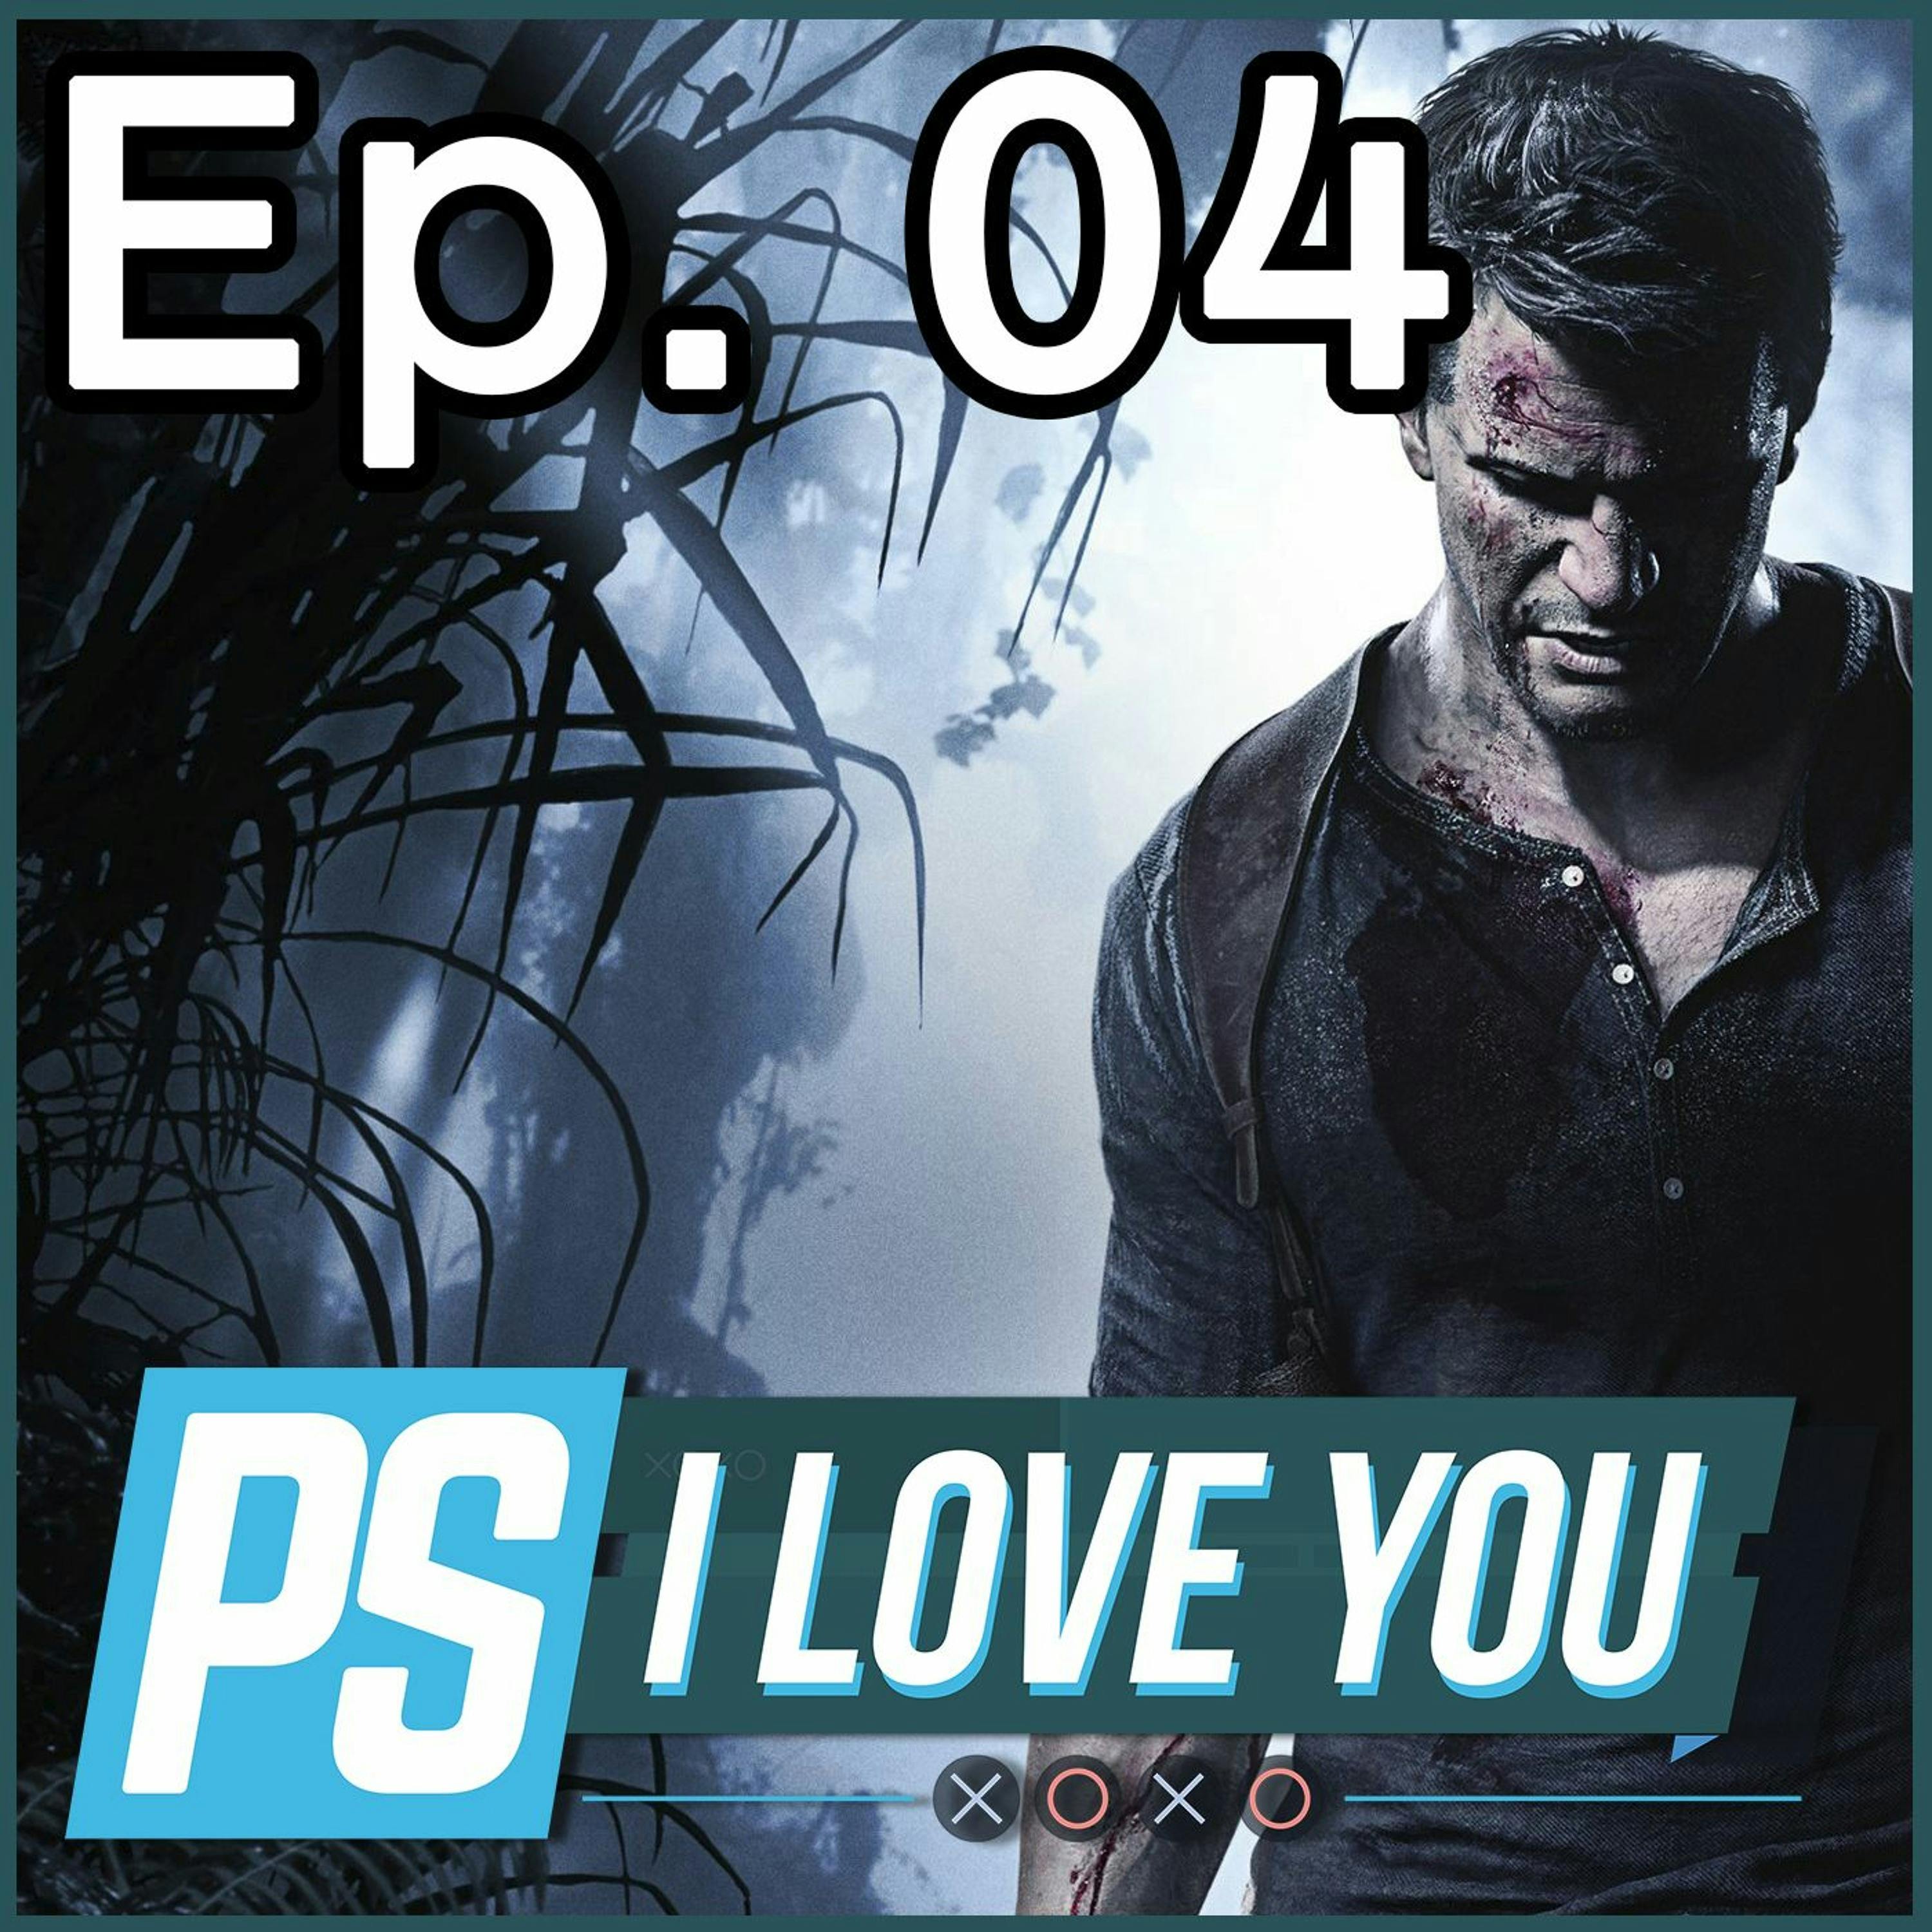 Uncharted 4 and Beyond: What Every PlayStation Studio Is Up To - PS I Love You XOXO Ep. 04